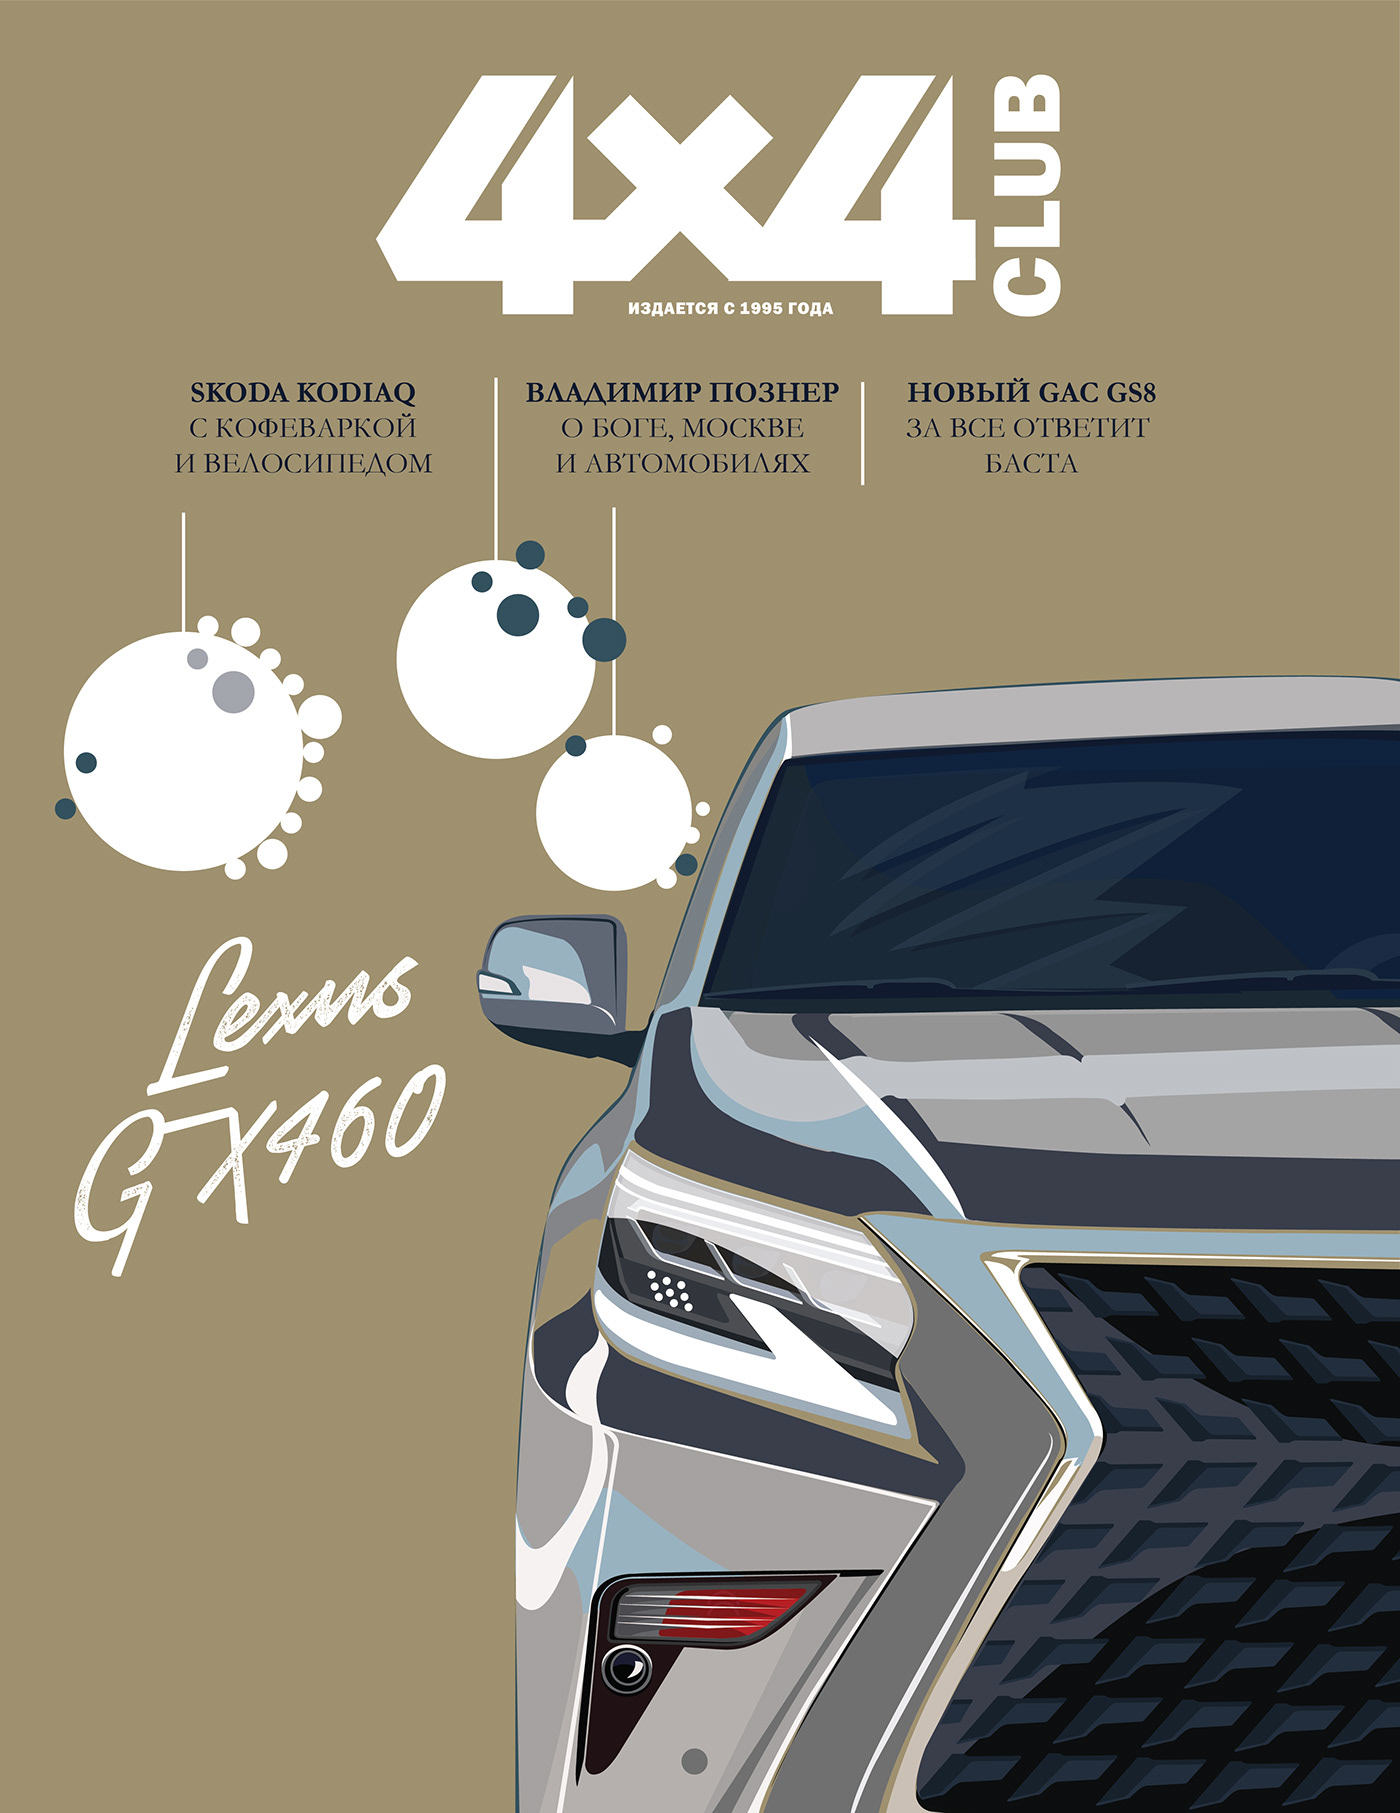 4x4 Cars cover desing luxsury magazine man sport Style woman